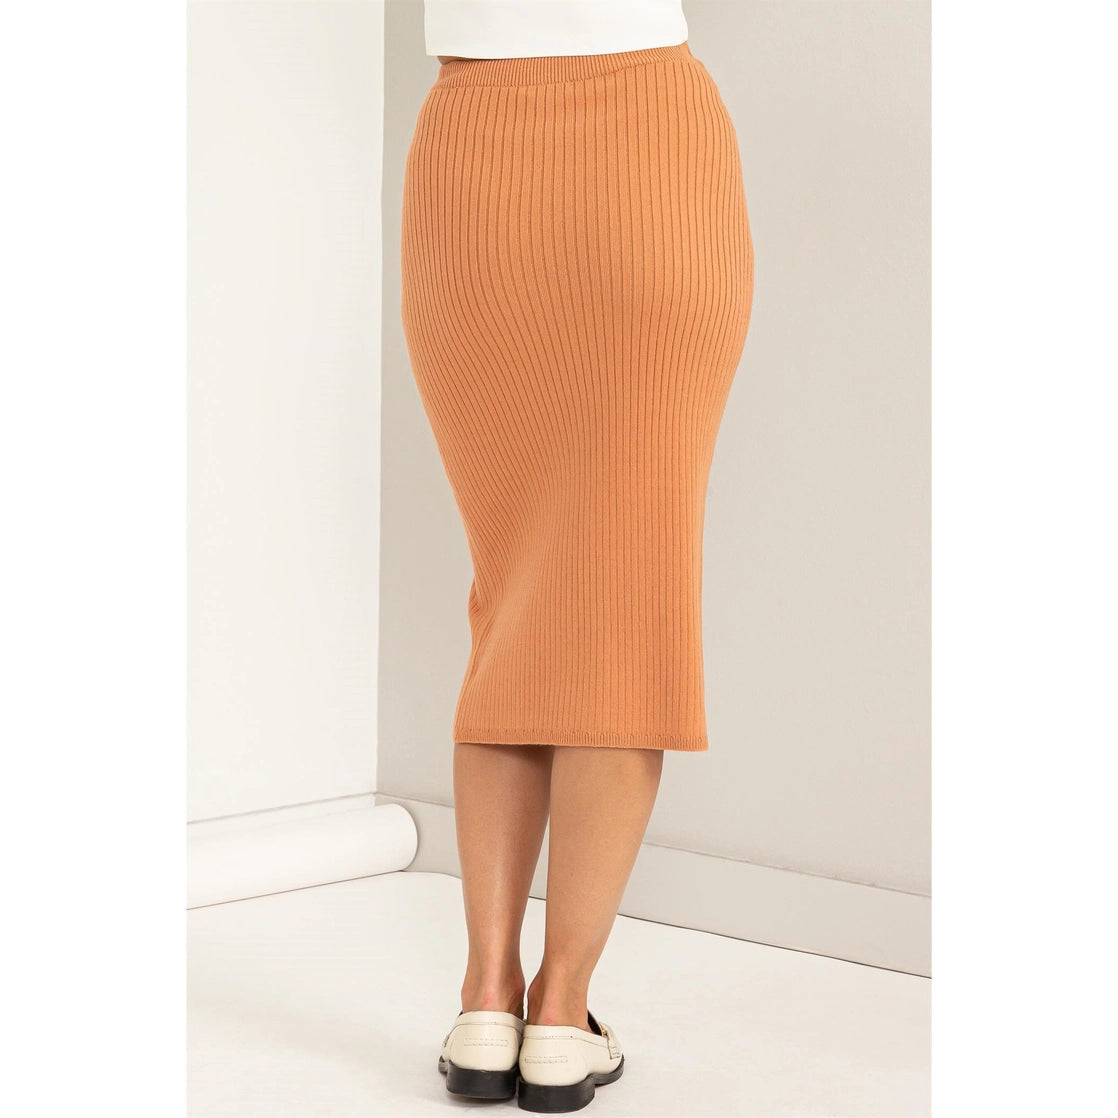 Lovely Embrace Knit Pencil Skirt in Apricot